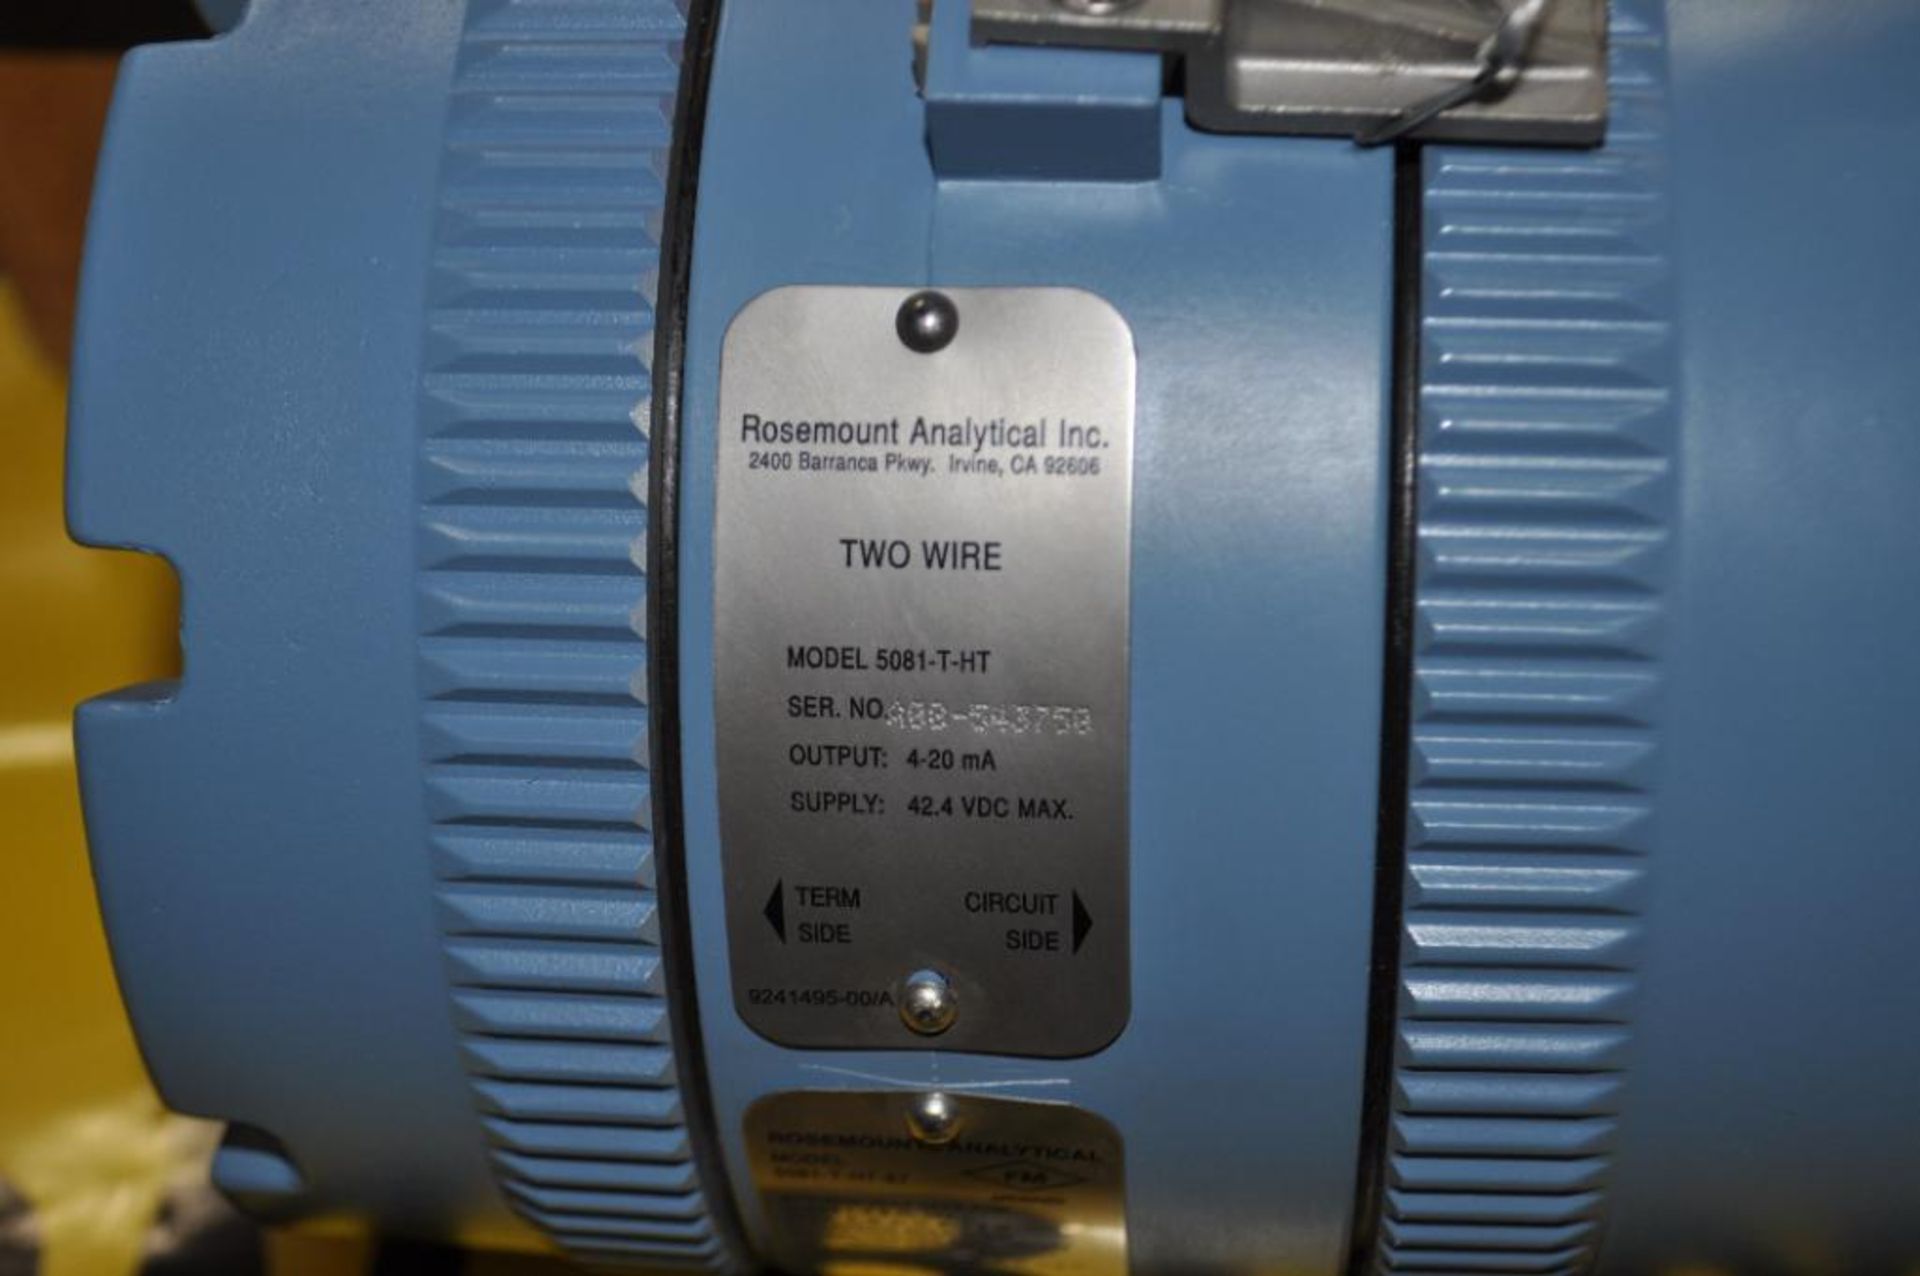 ROSEMOUNT ANALYTICAL INC. TWO WIRE CONDUCTIVITY TRANSMITTER, MODEL: 5081-T-HT, NEW IN BOX - Image 3 of 4